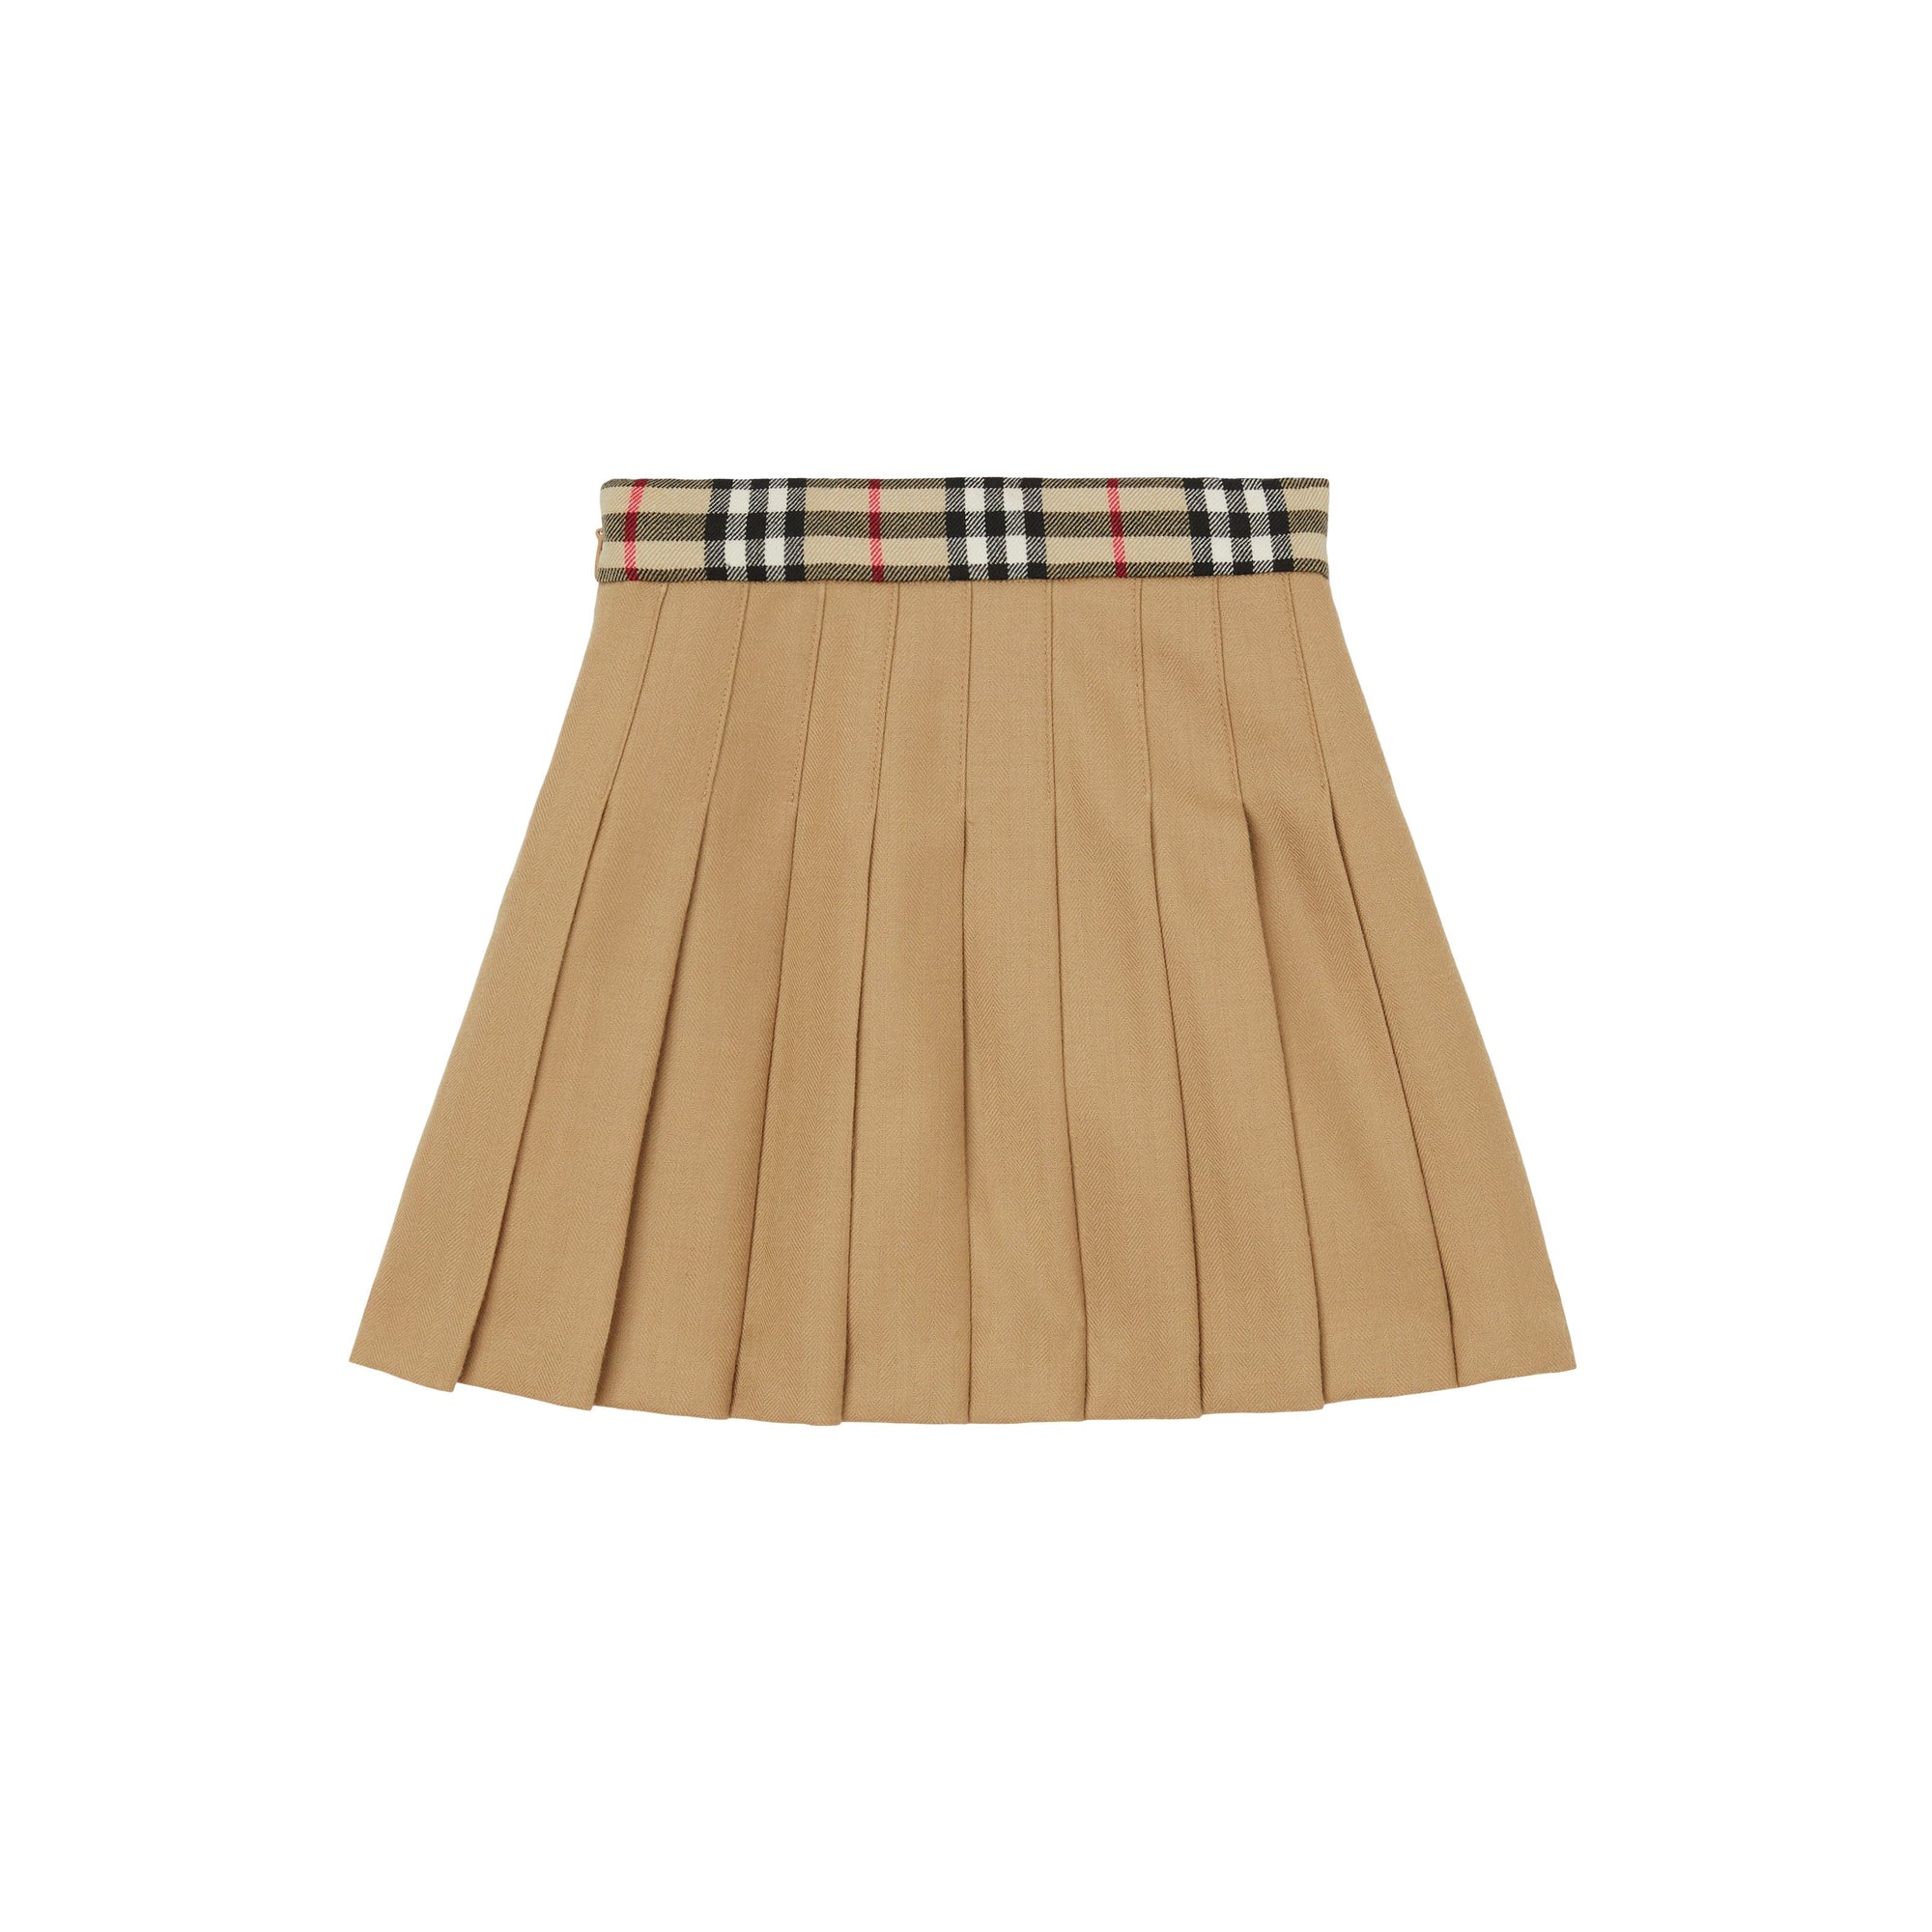 ARCHIVE BEIGE IP CHK Childrens INF GIRL SKIRTS